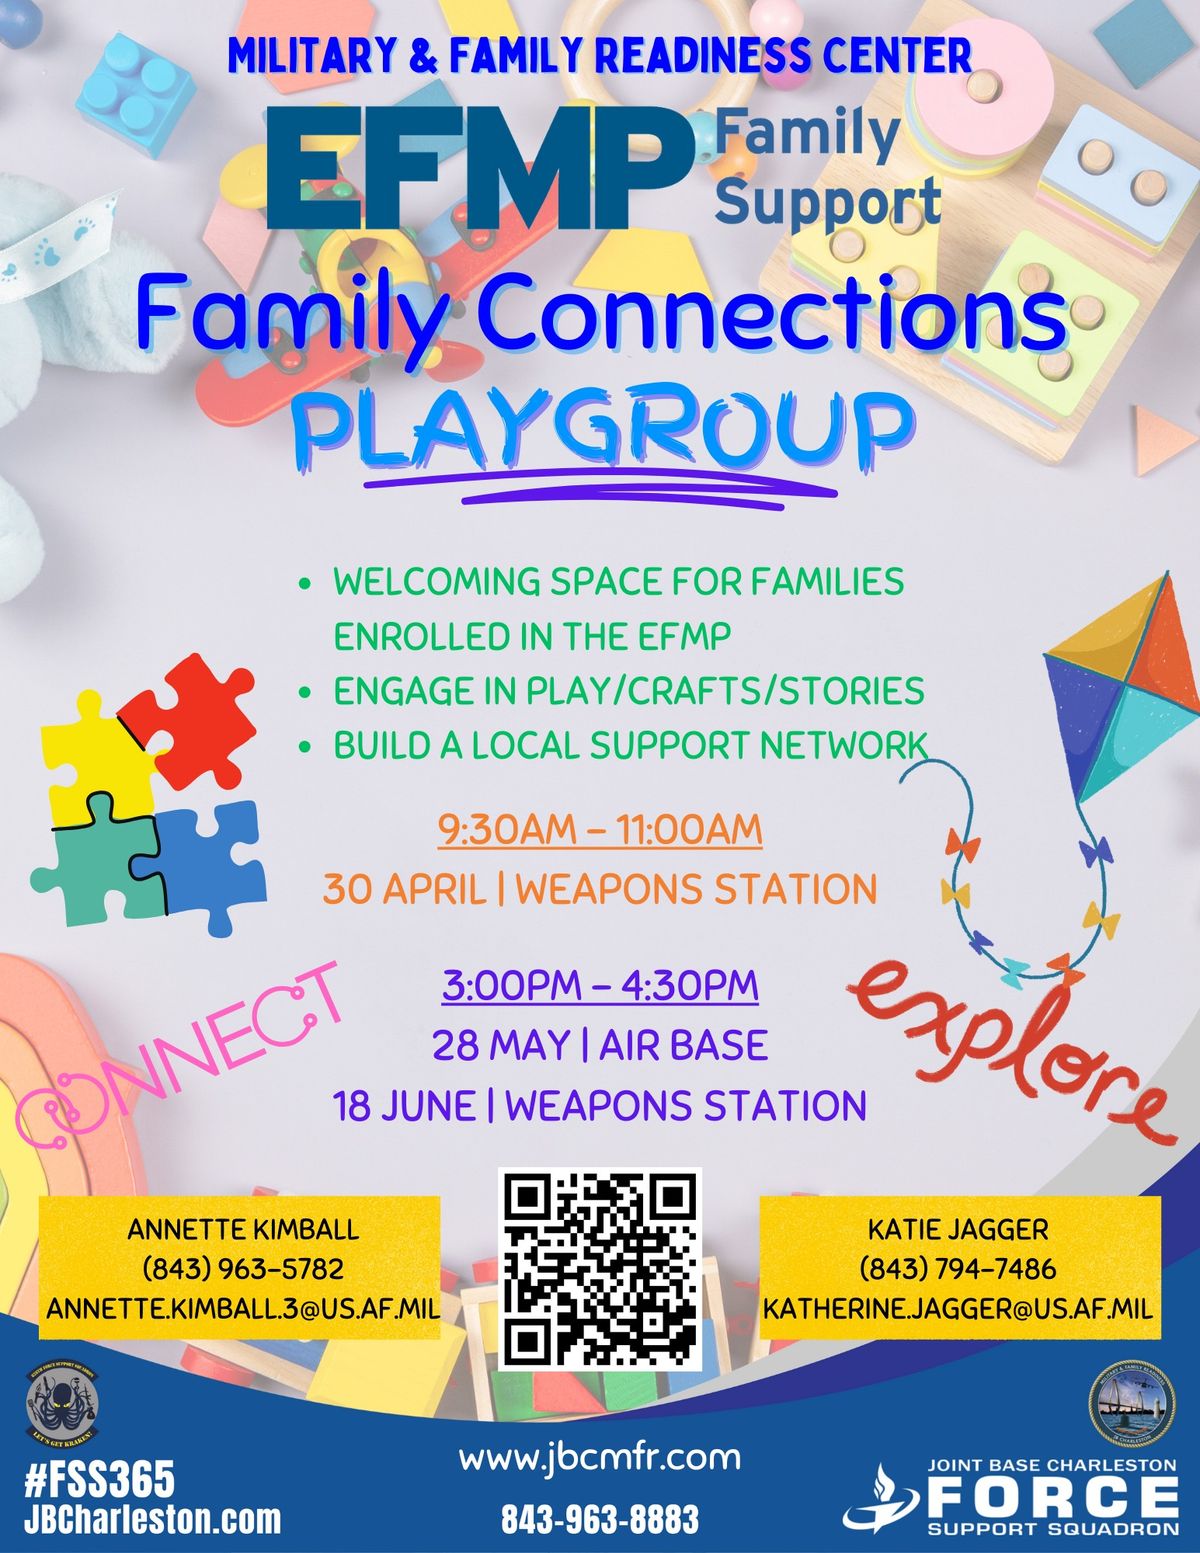 EFMP Family Connections Playgroup